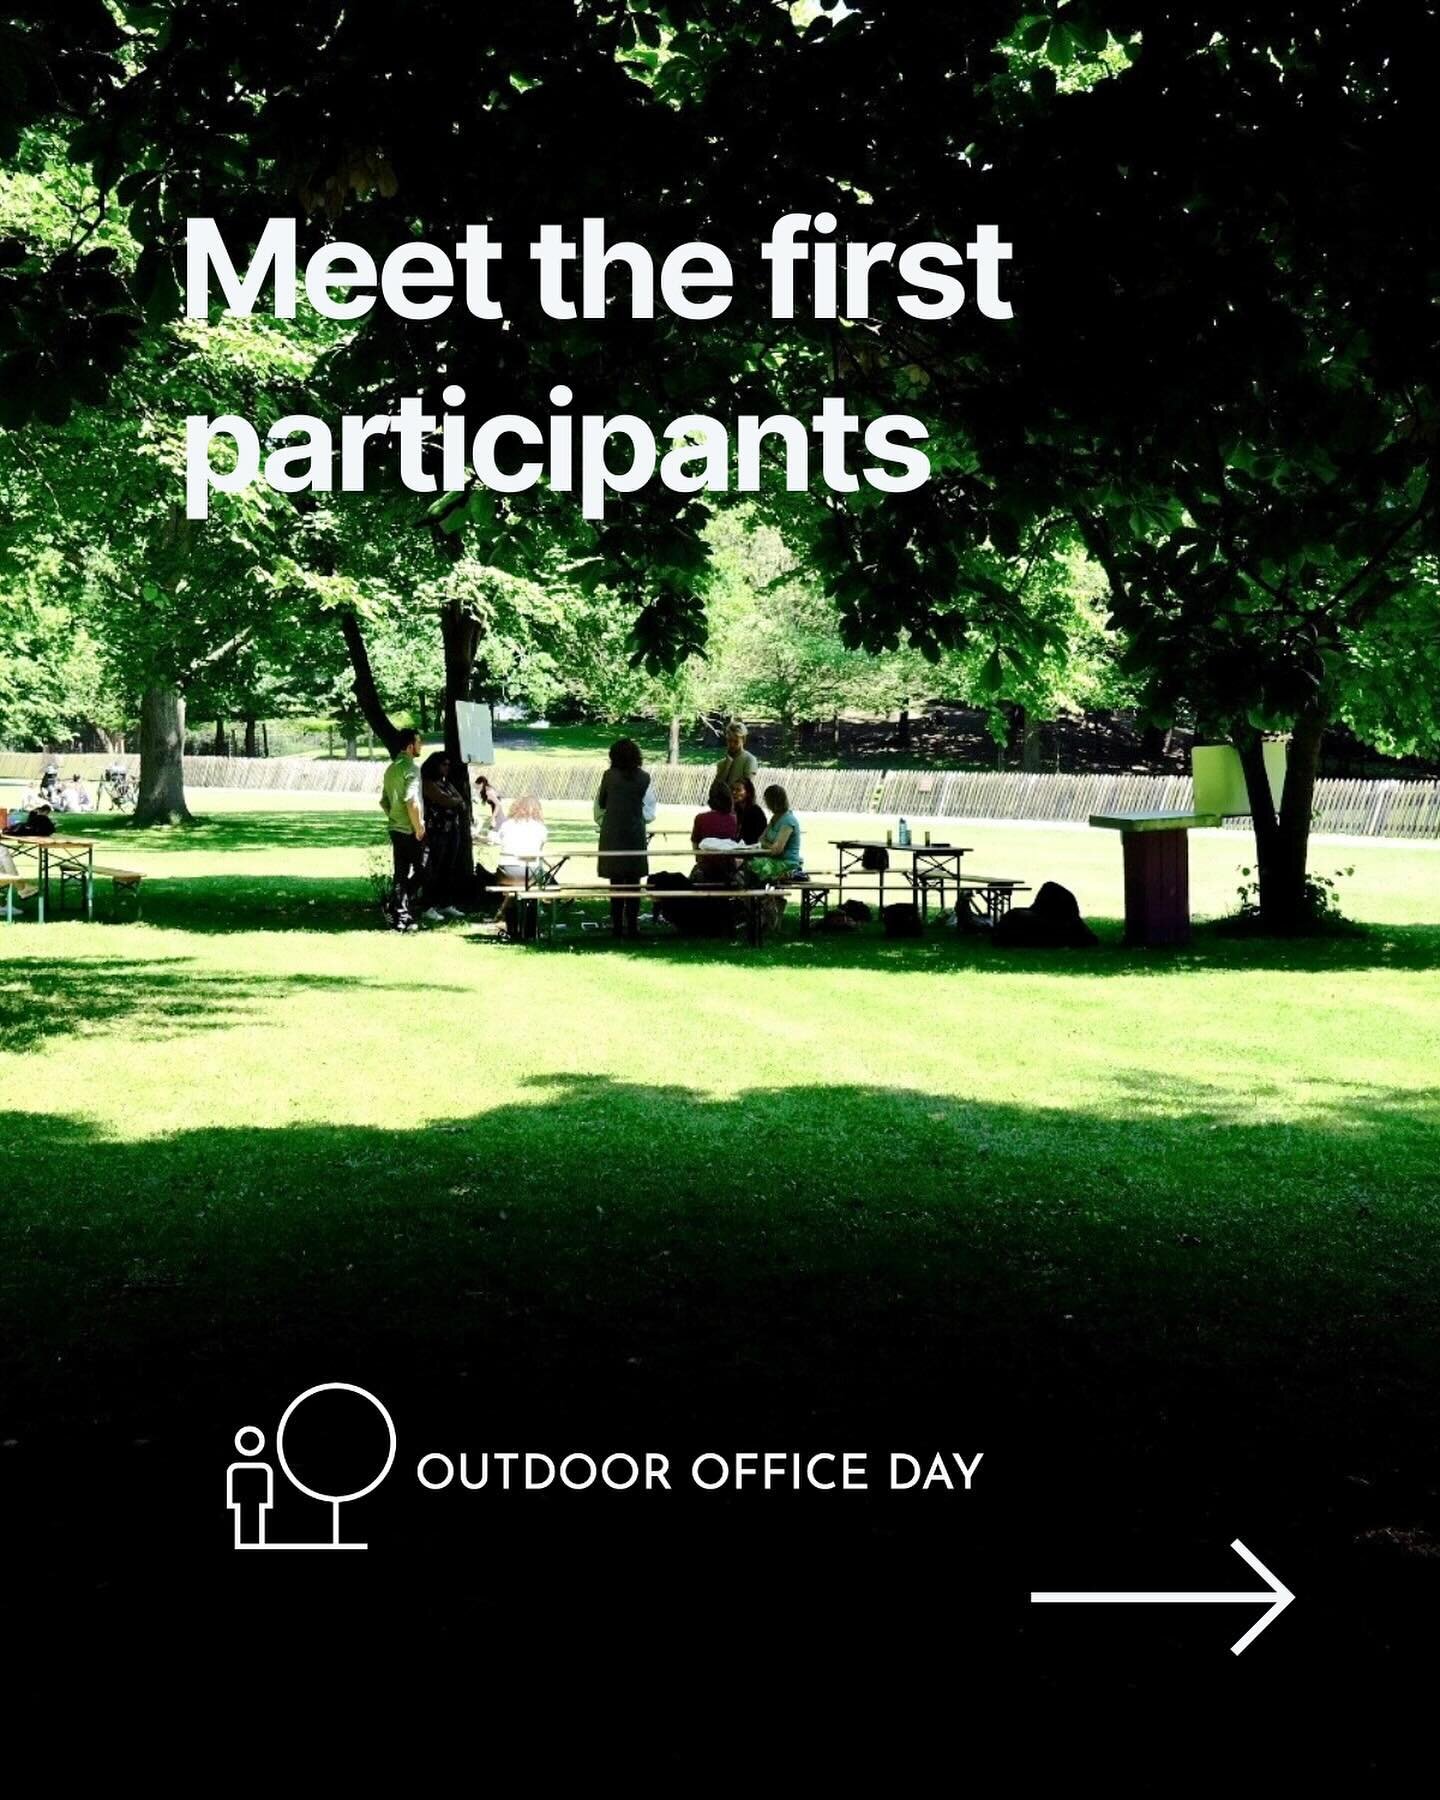 We take work outdoors into the #urbannature each day. And we&rsquo;ll celebrate together the #outdoorofficeday on June 13th.
#linkinbio

Meet the first participants:
🌱 Helsingborg with Catharina Nilsson/ @fredriksdal https://lnkd.in/eH9GThhG
🌱 Utre